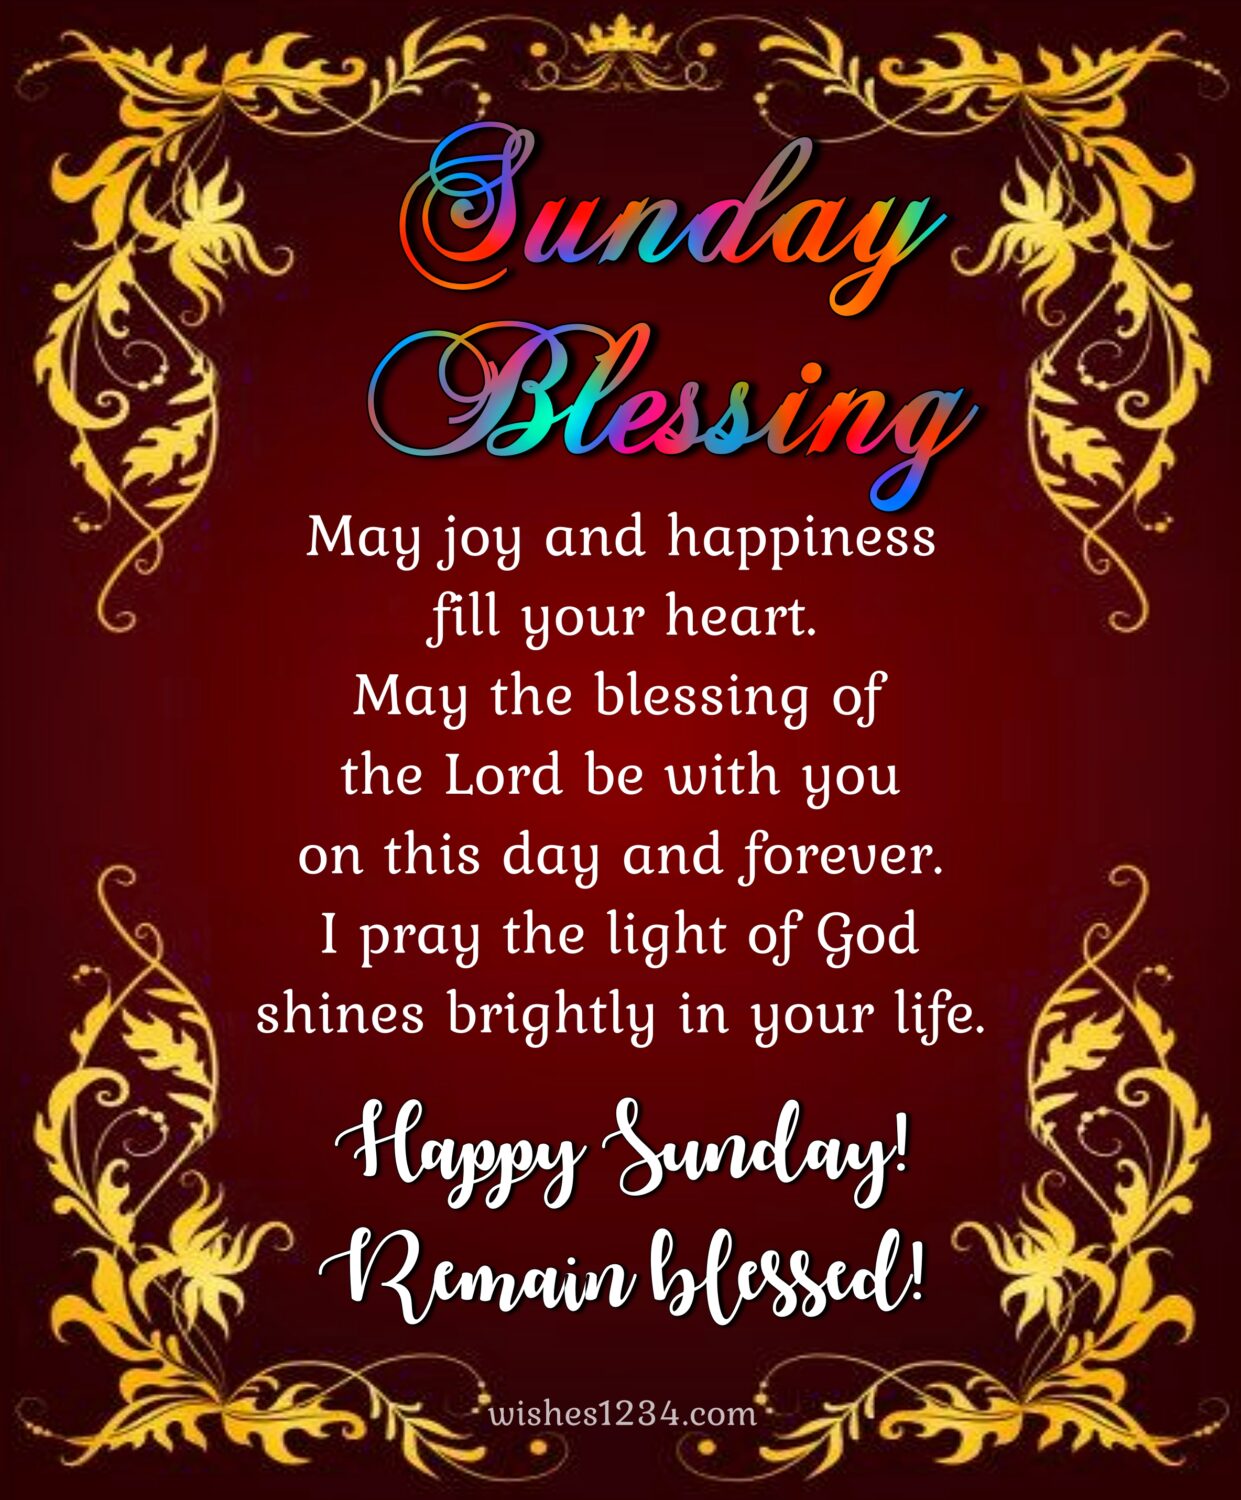 Sunday blessing with red and golden border, Happy Sunday